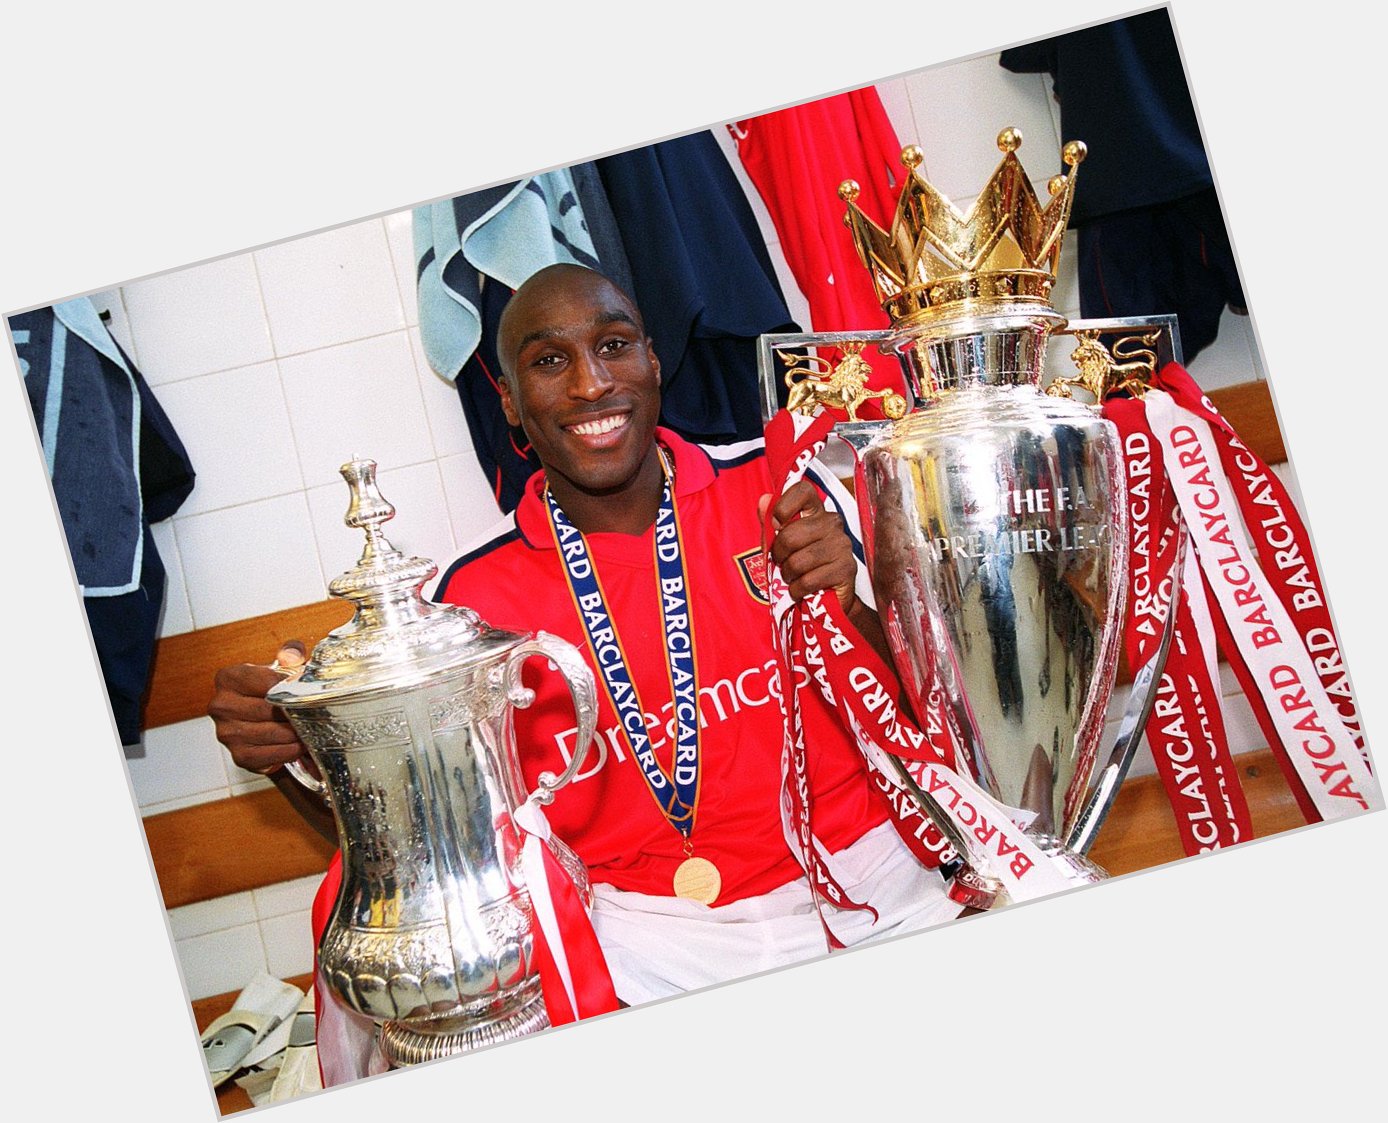 Happy Birthday to Sol Campbell!

Left for a reason, Tottenham Hotspur always in our shadow.

North London s red 